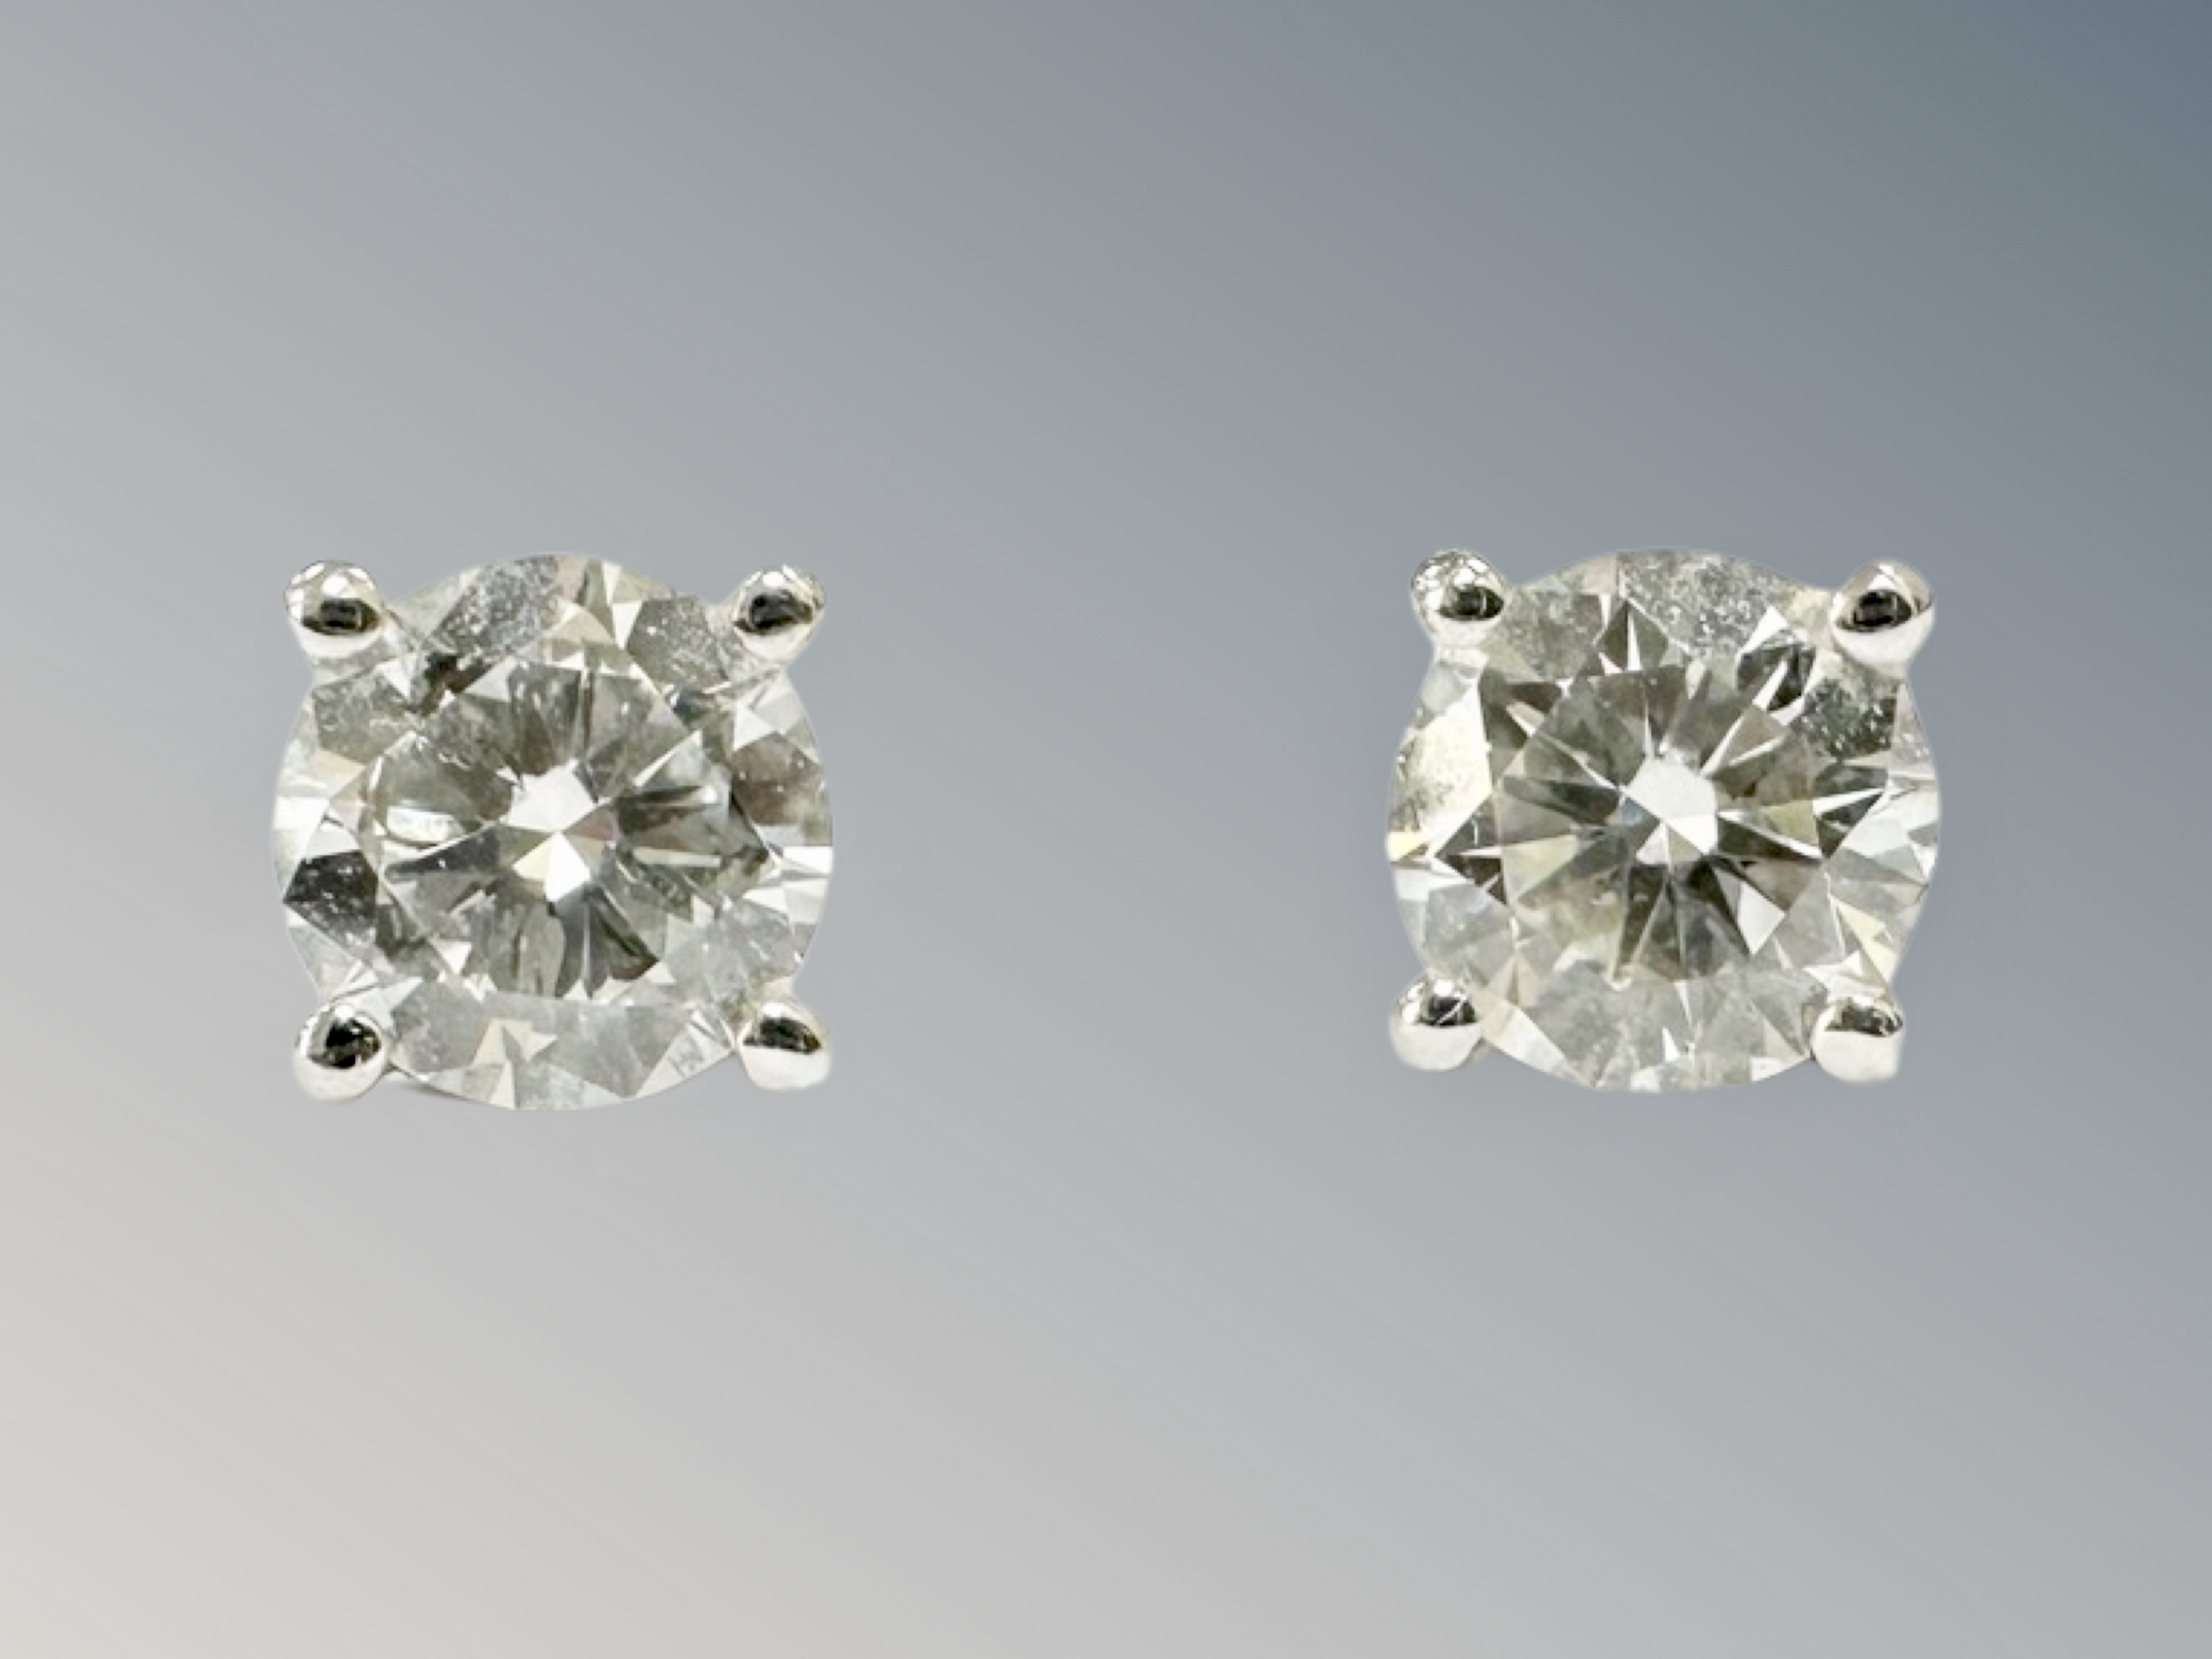 A pair of 18ct white gold diamonds stud earrings, each approximately 0.3ct.